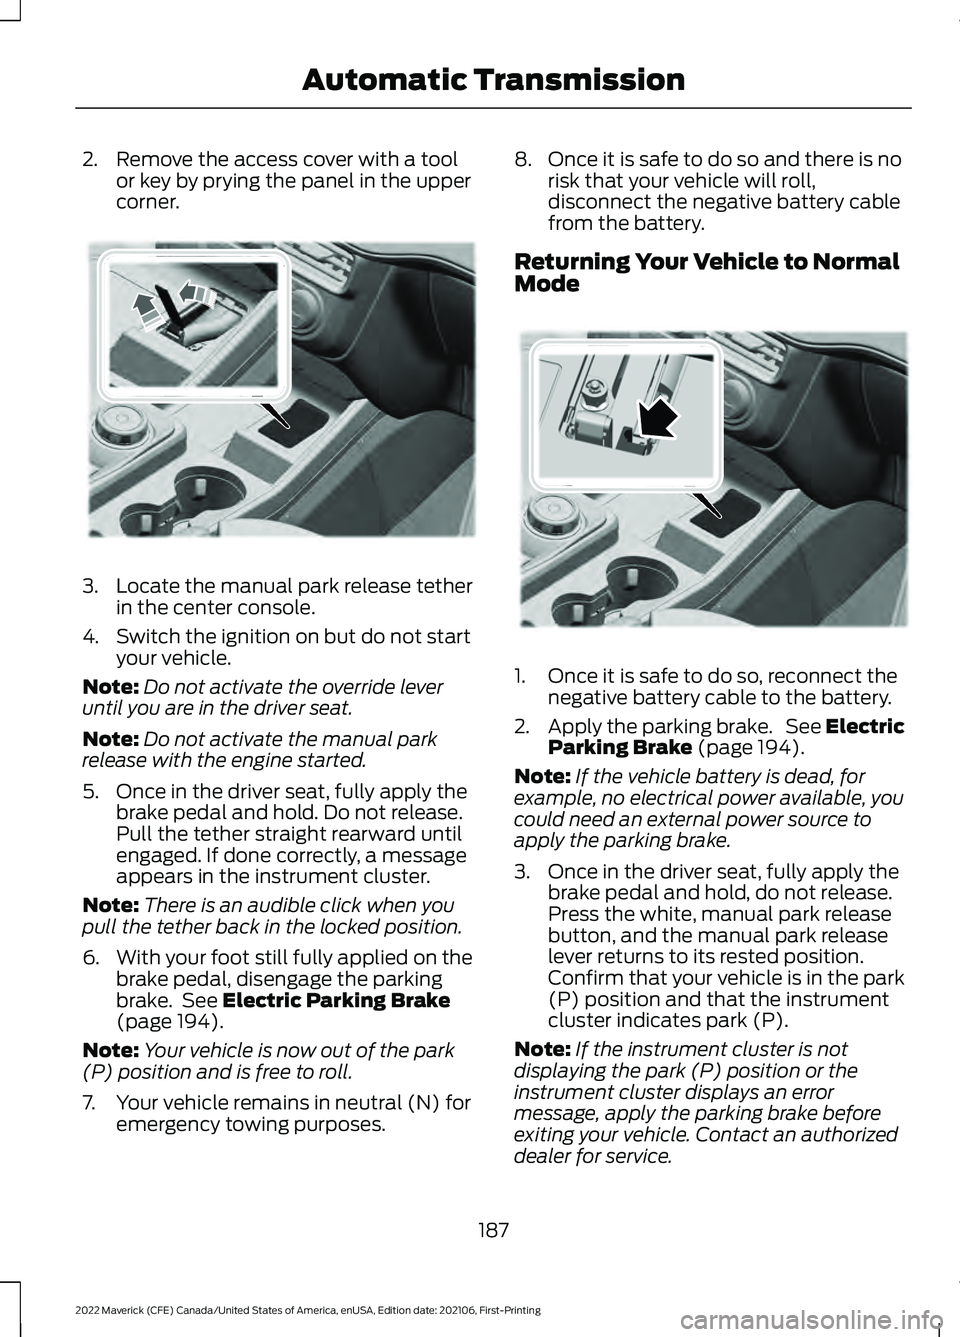 FORD MAVERICK 2022 User Guide 2. Remove the access cover with a tool
or key by prying the panel in the upper
corner. 3.
Locate the manual park release tether
in the center console.
4. Switch the ignition on but do not start your v